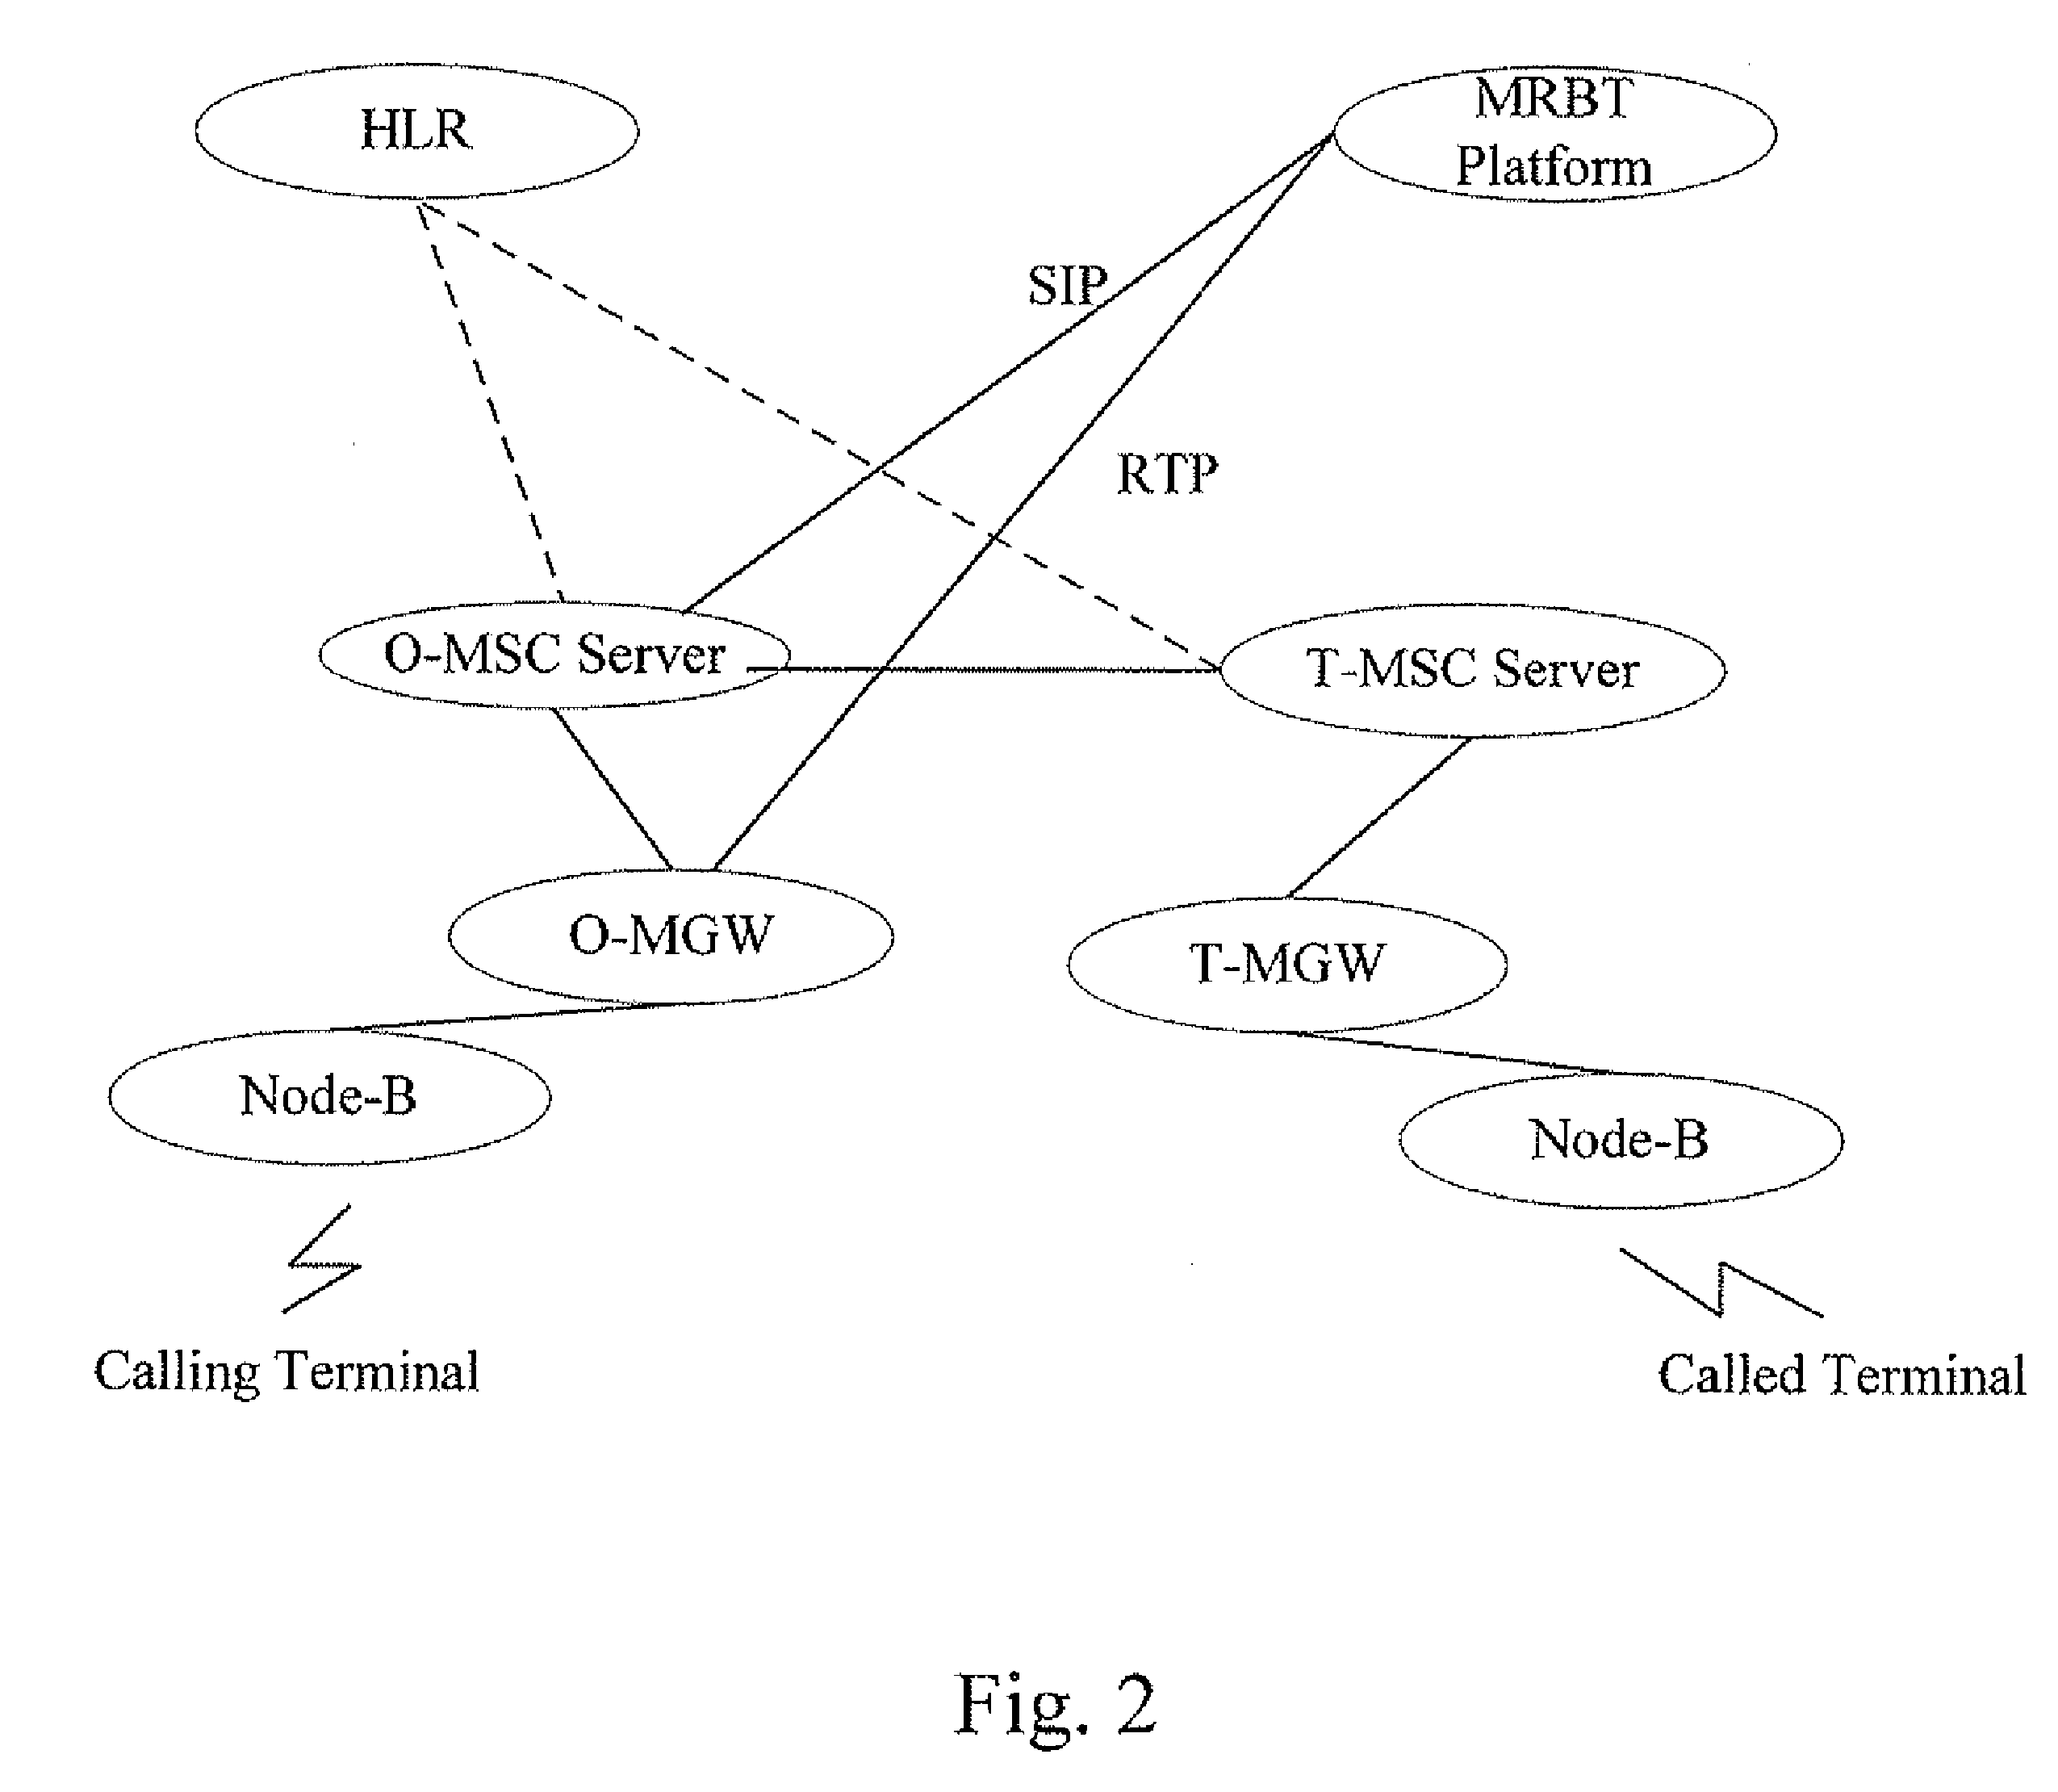 System and method for implementing multimedia ring back tone service